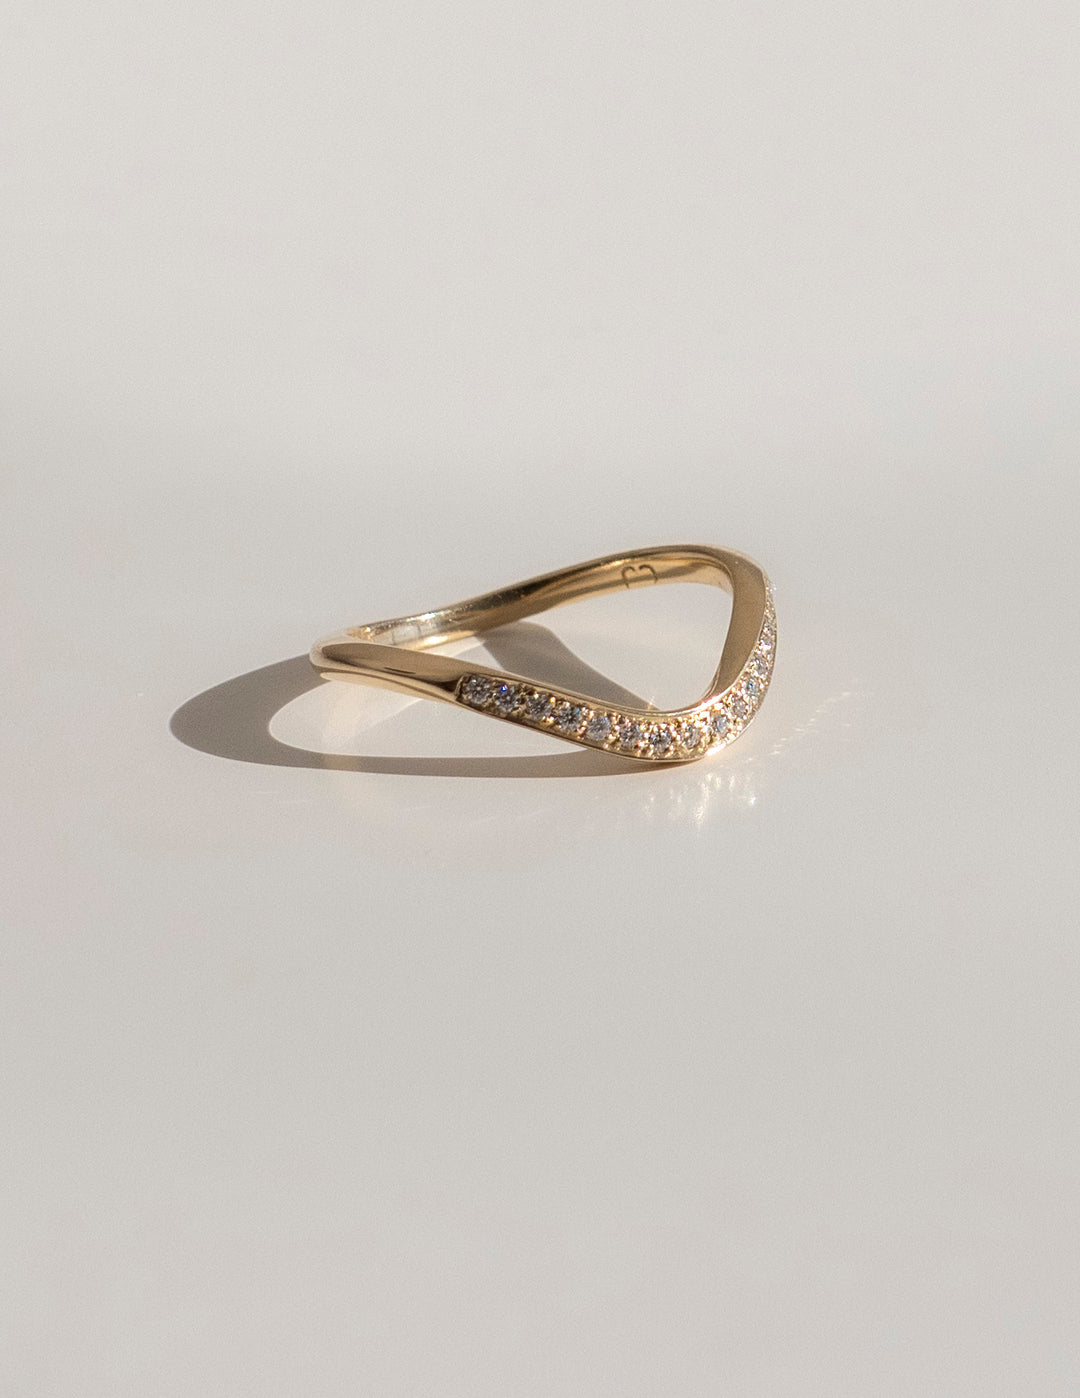 Cadette Wave Pave Diamond Band. Classic 14k Solid gold classic pave diamond band. Nature inspired classic pave diamond band.